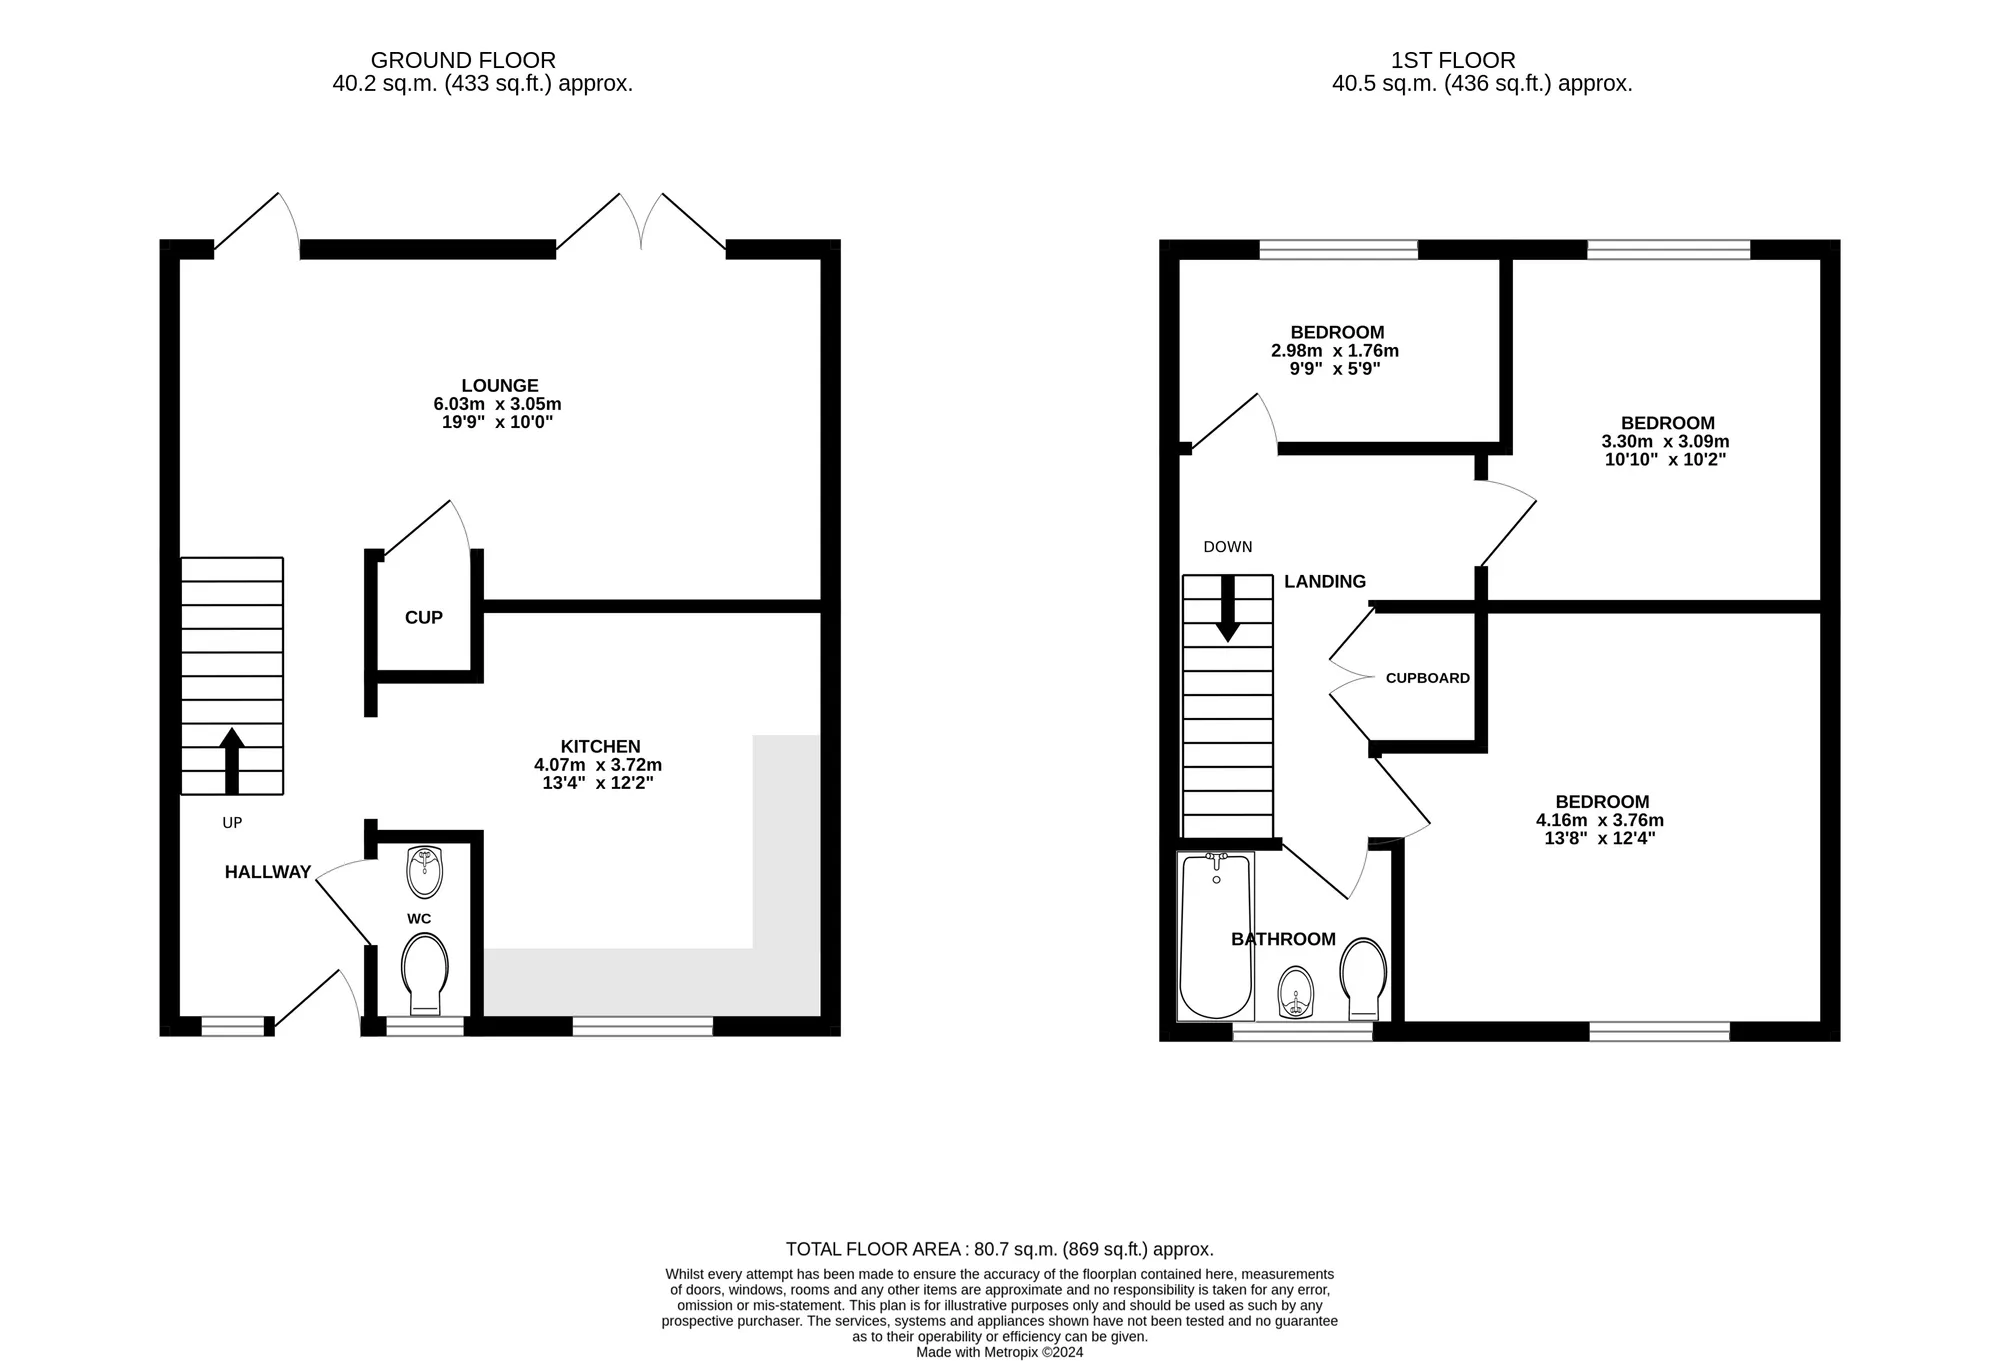 3 bed mid-terraced house for sale in Webbs Way, Bournemouth - Property floorplan